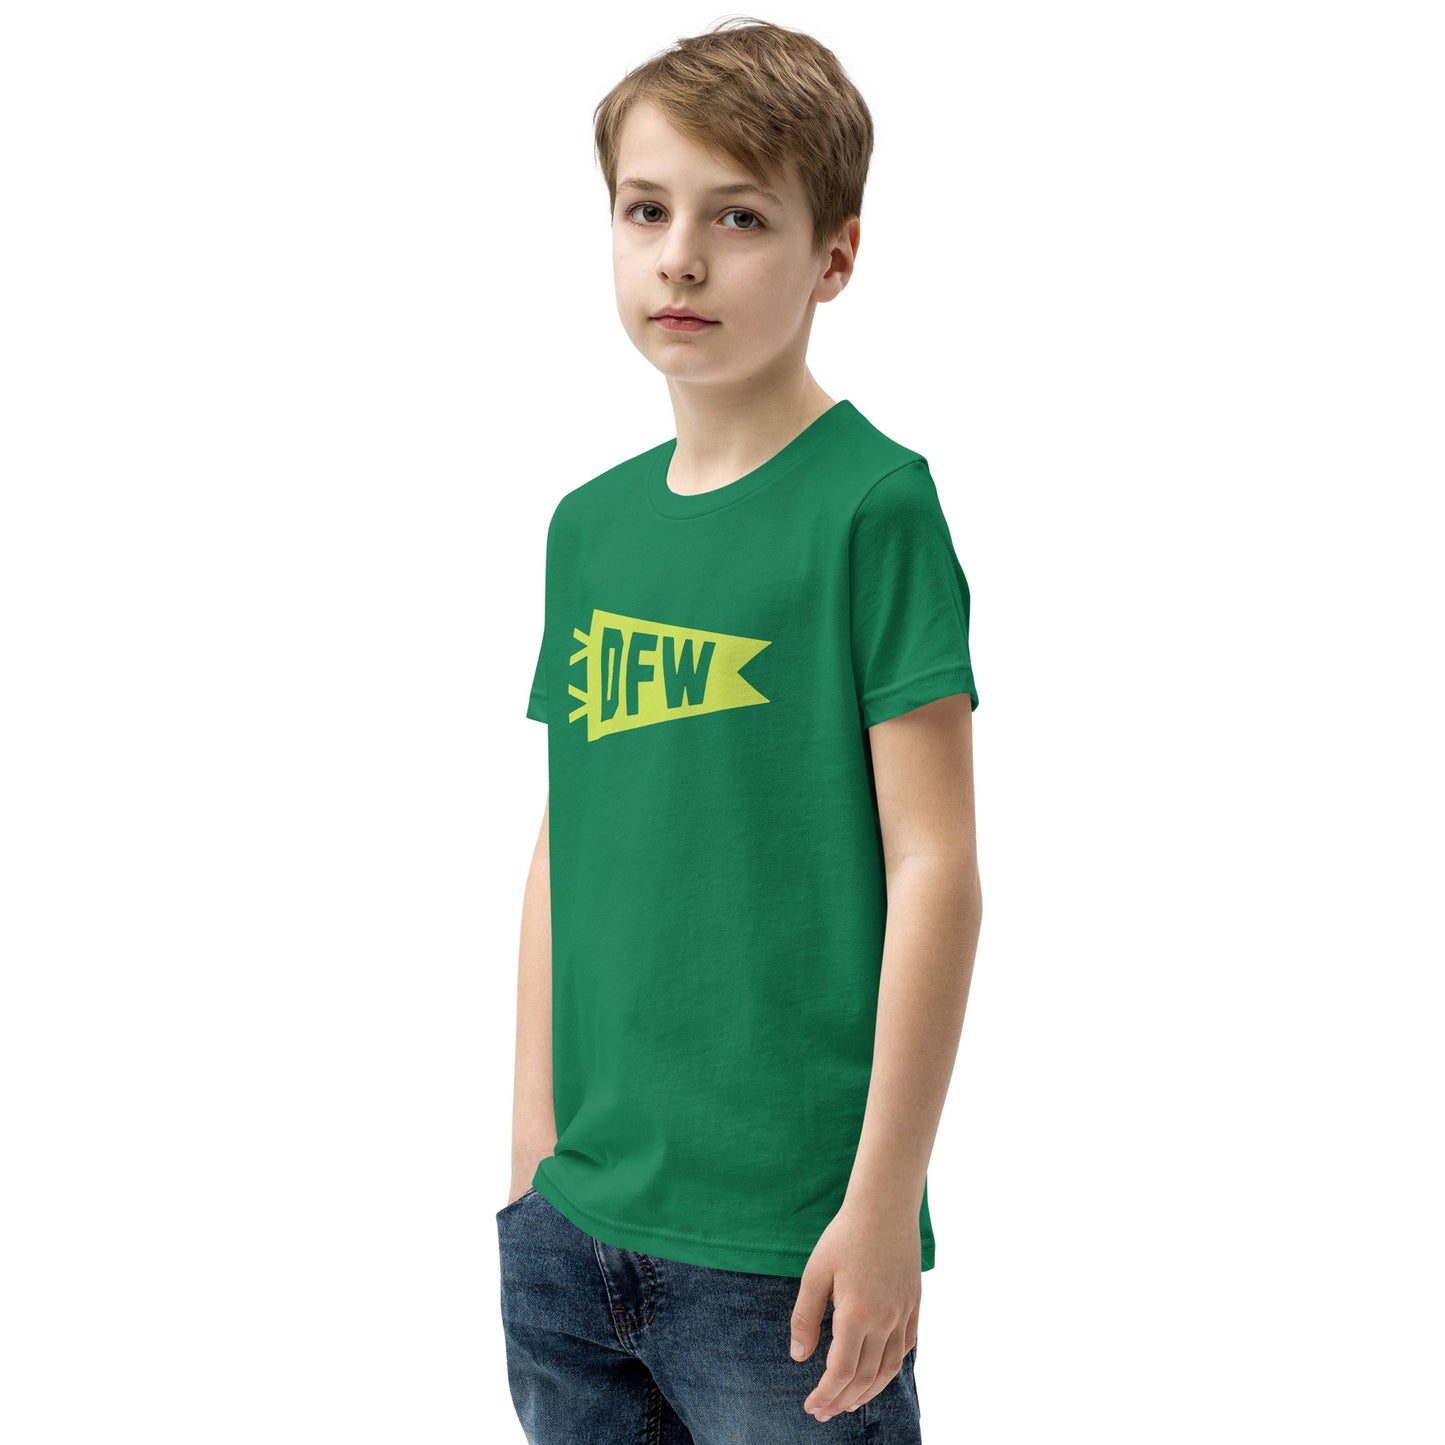 Kid's Airport Code Tee - Green Graphic • DFW Dallas • YHM Designs - Image 06